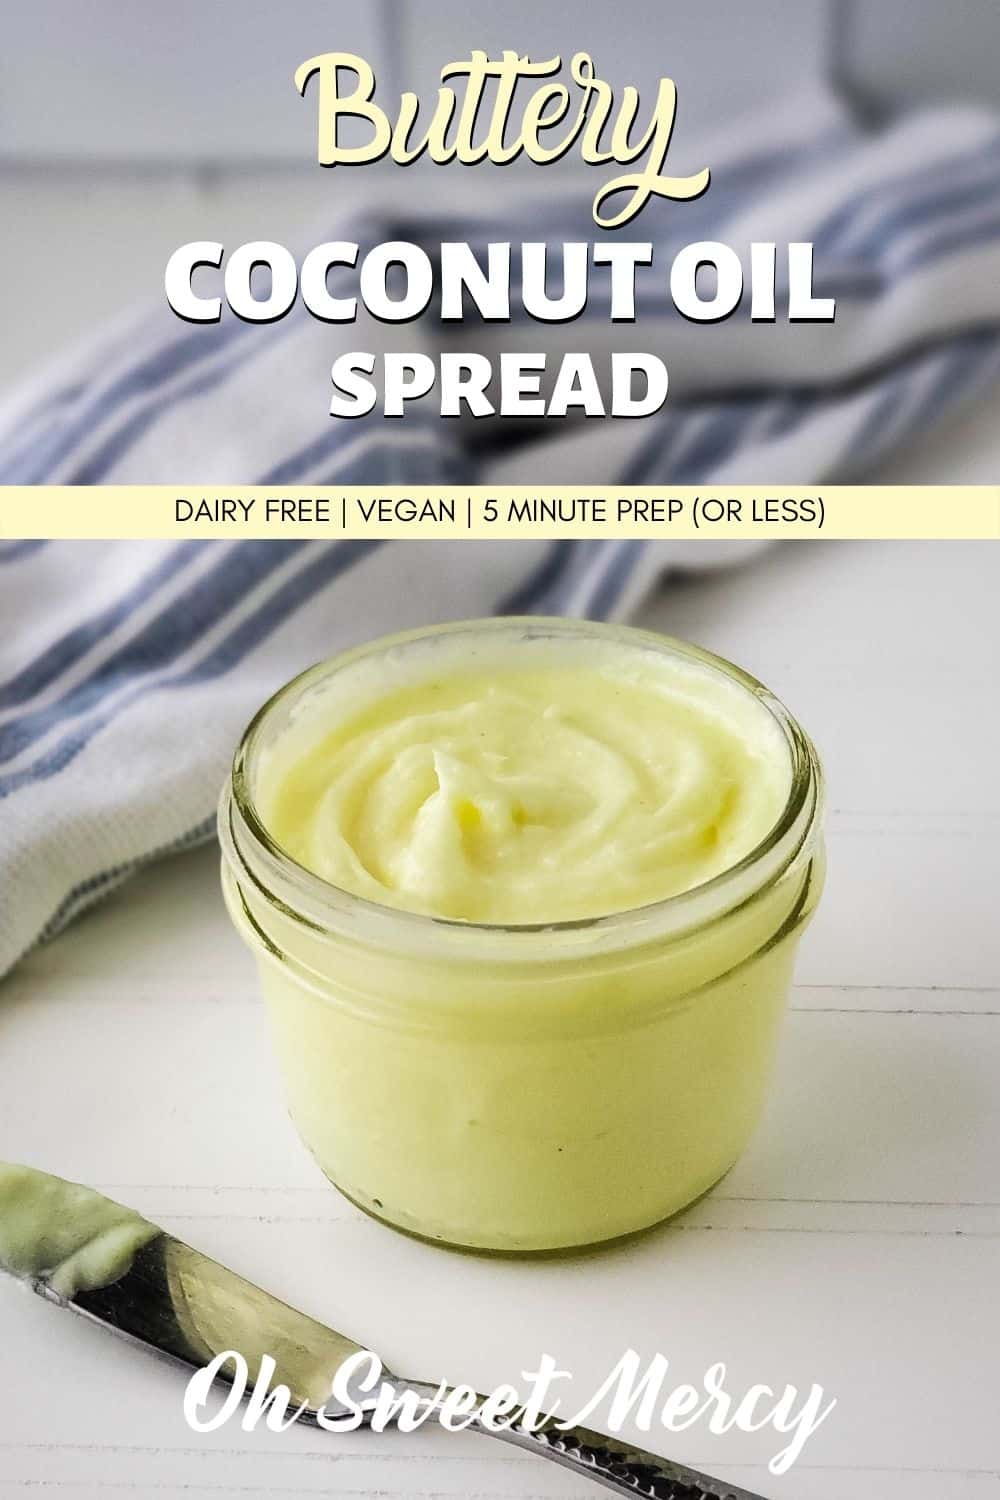 Need a substitute for butter? This easy Buttery Coconut Oil Spread whips up in 5 minutes or less. Use it in cooking, baking,  spread on bread or toast, and melted over cooked veggies. #thm #dairyfree #vegan #vegetarian #coconutoil @ohsweetmercy